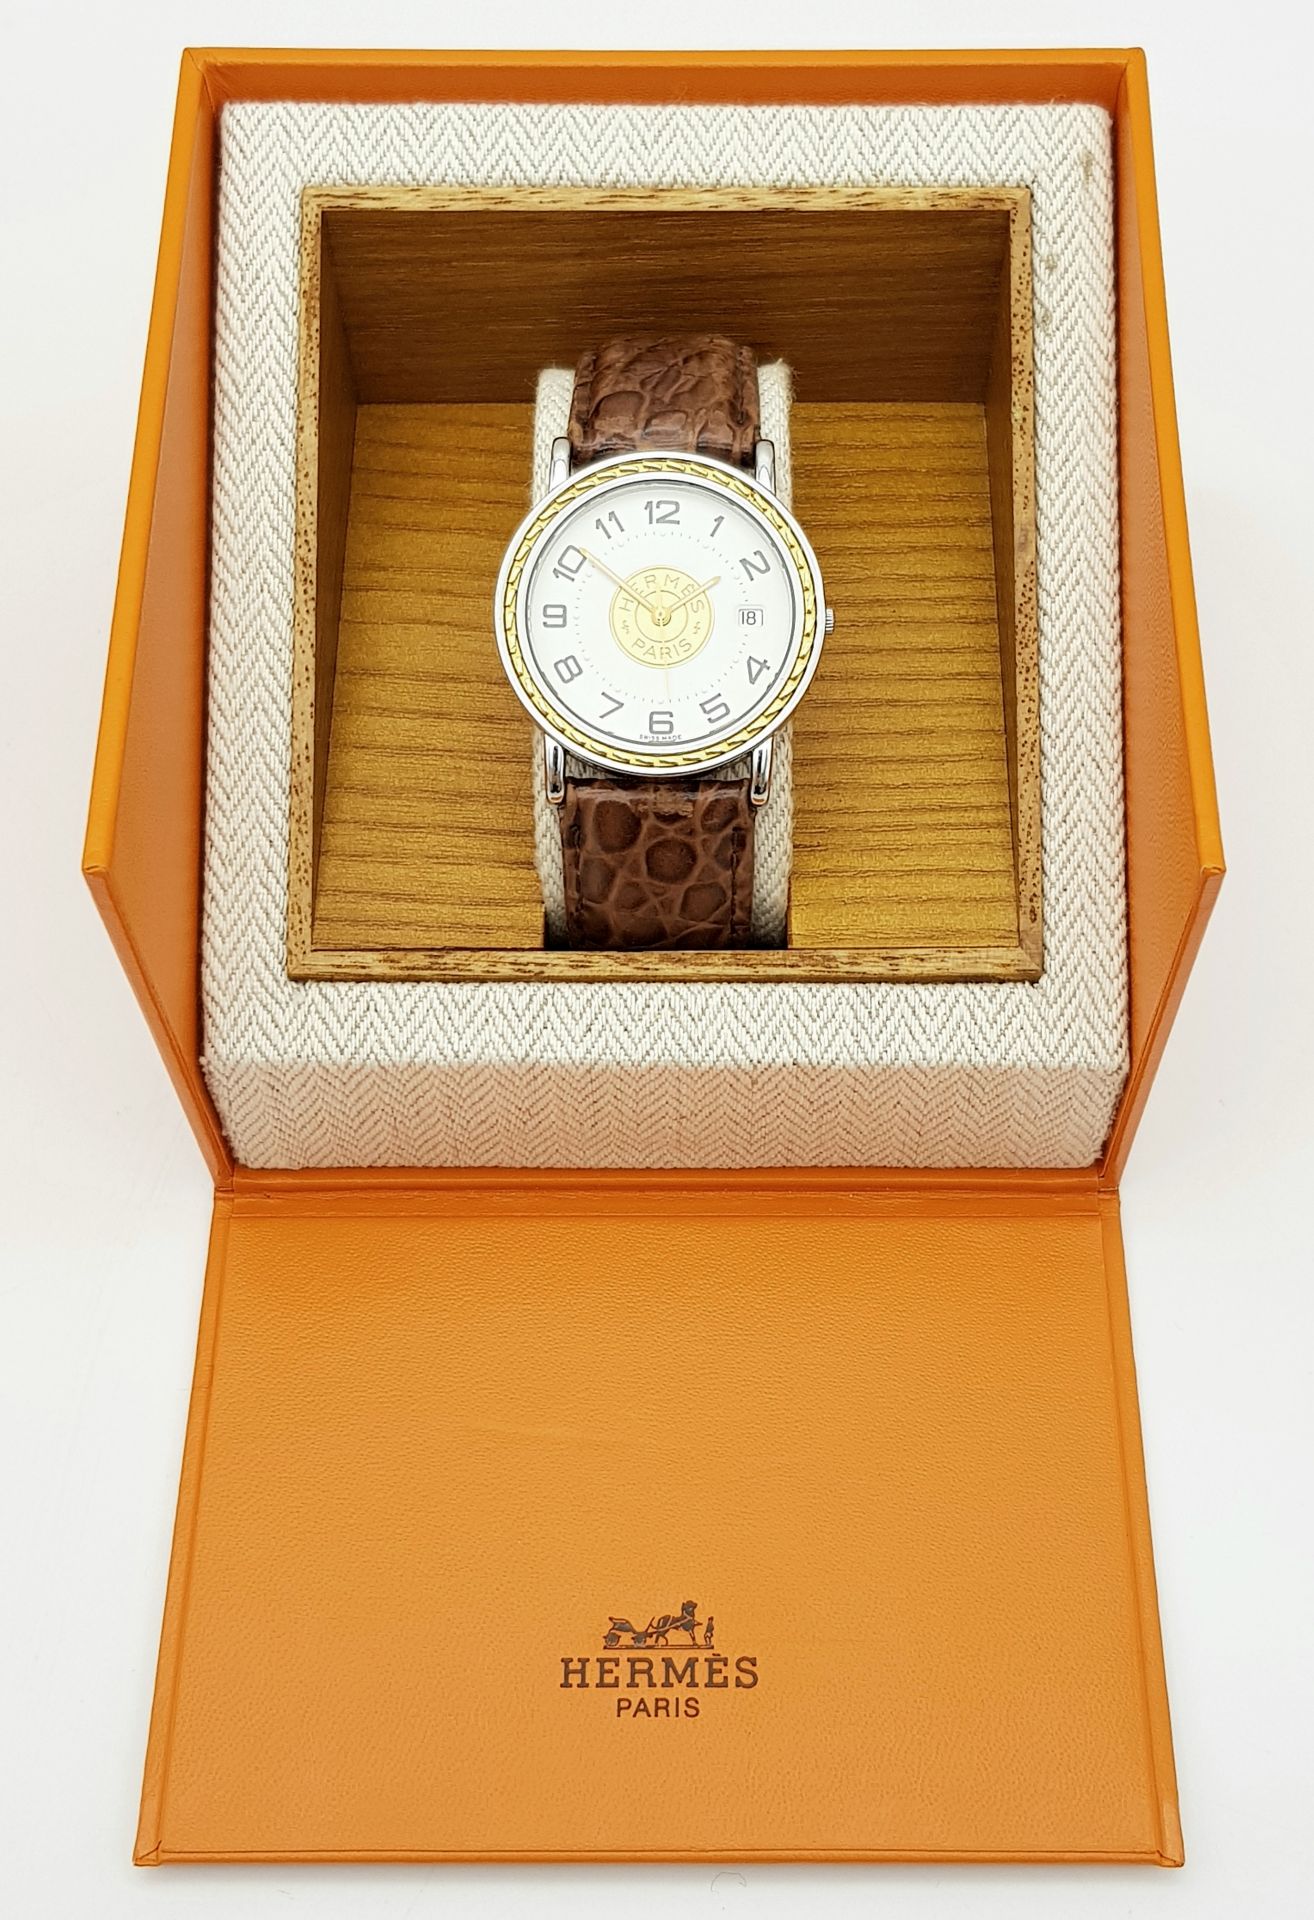 A FABULOUS HERMES OF PARIS GENTS WATCH WITH WHITE DIAL AND CIRCULAR CENTRAL LOGO ON A BROWN - Image 3 of 8